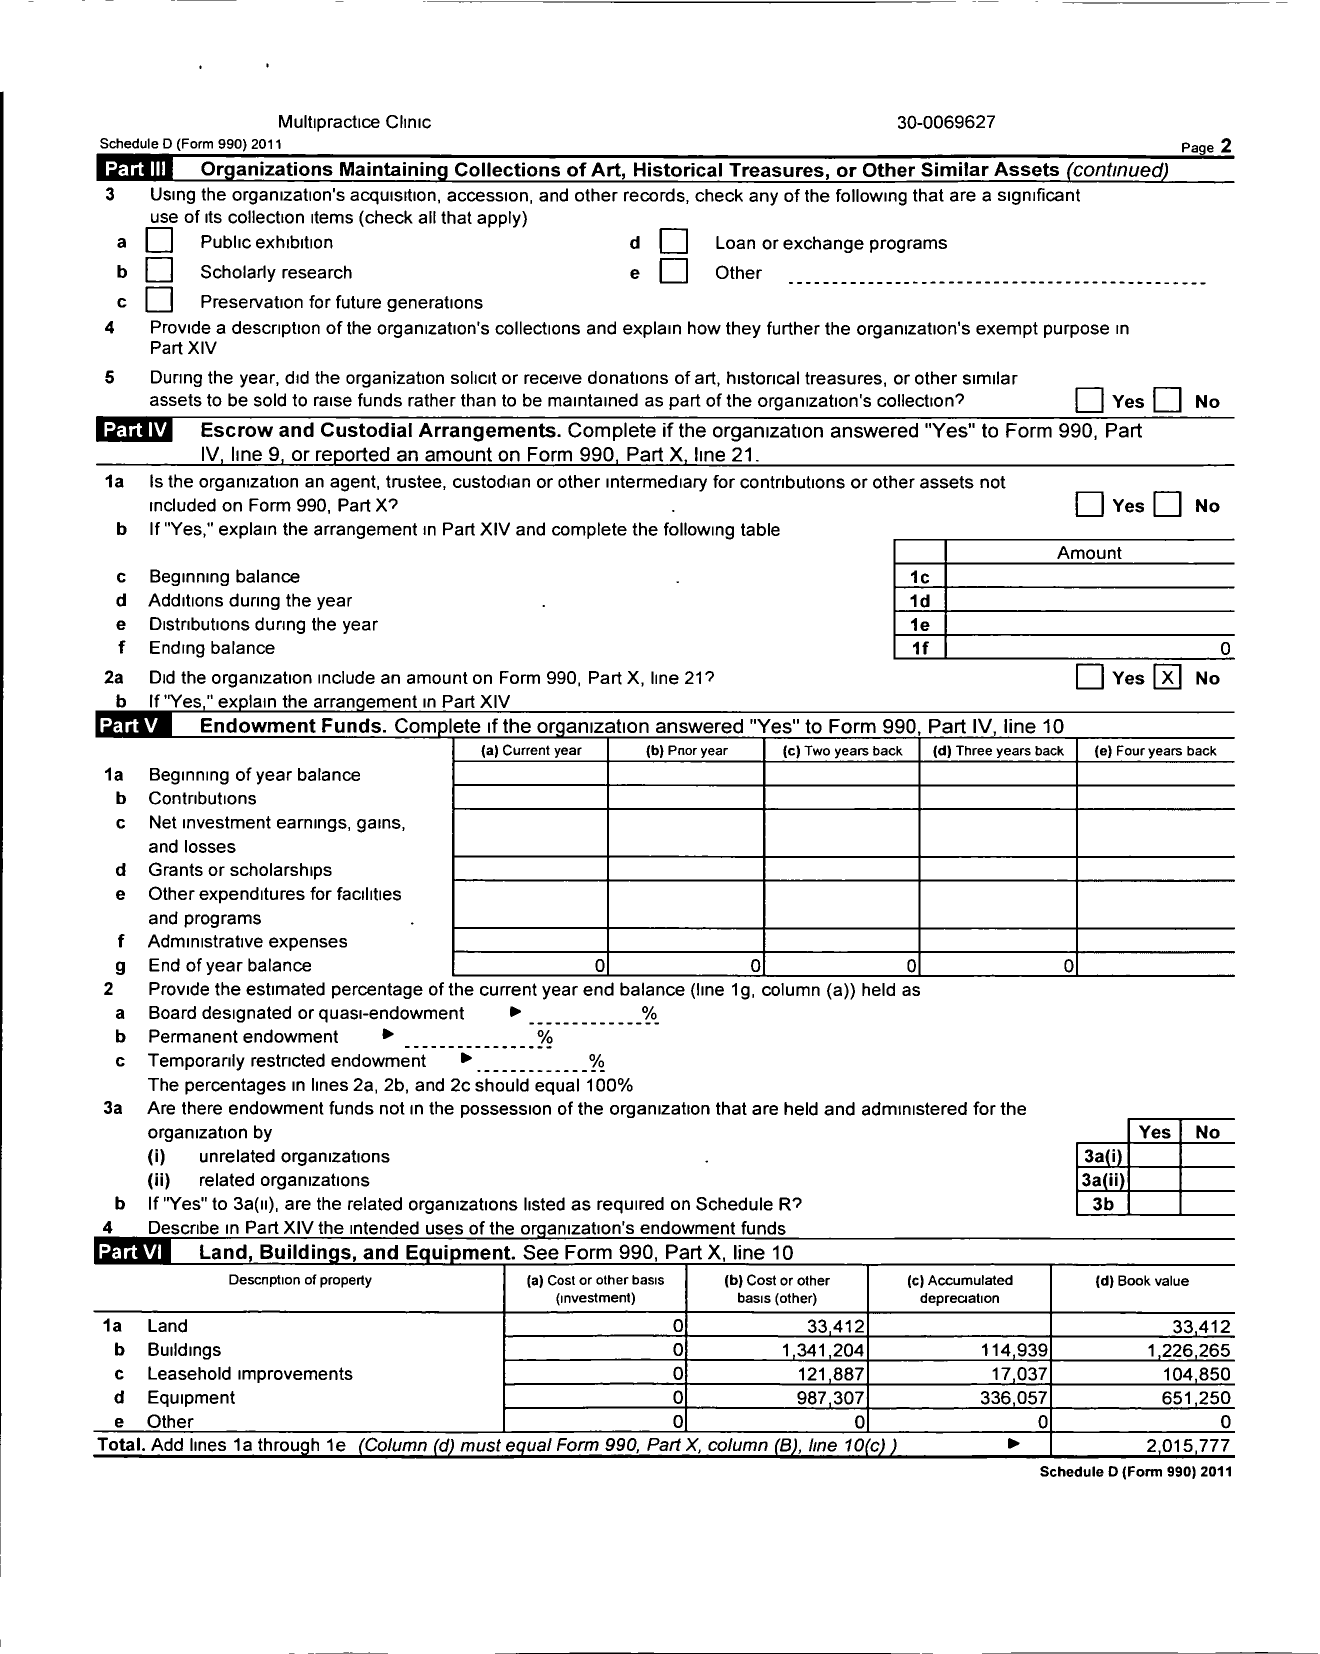 Image of first page of 2011 Form 990 for Multipractice Clinic